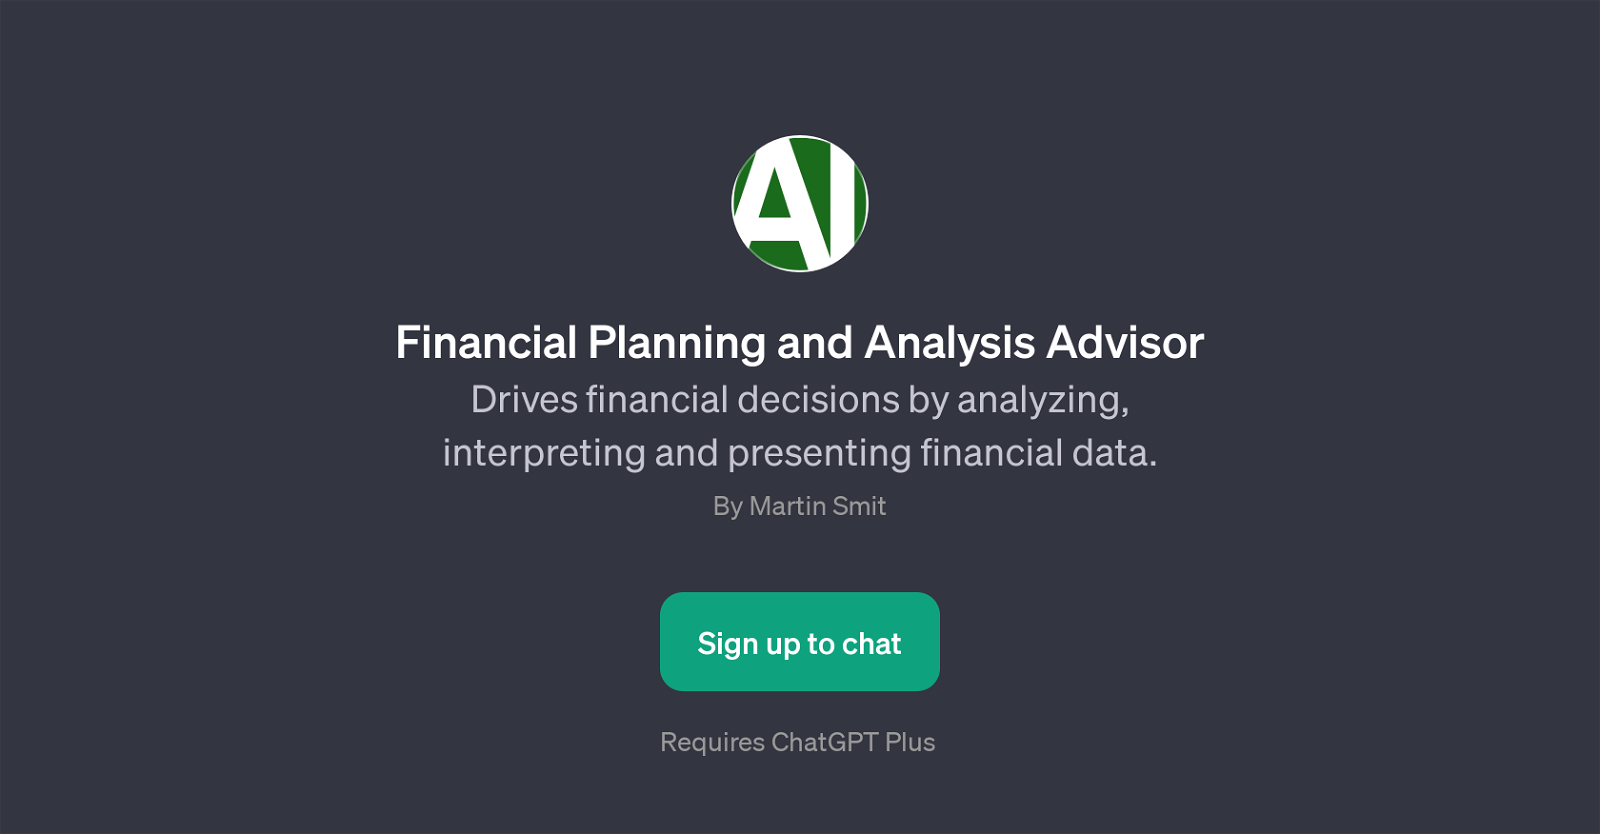 Financial Planning and Analysis Advisor website